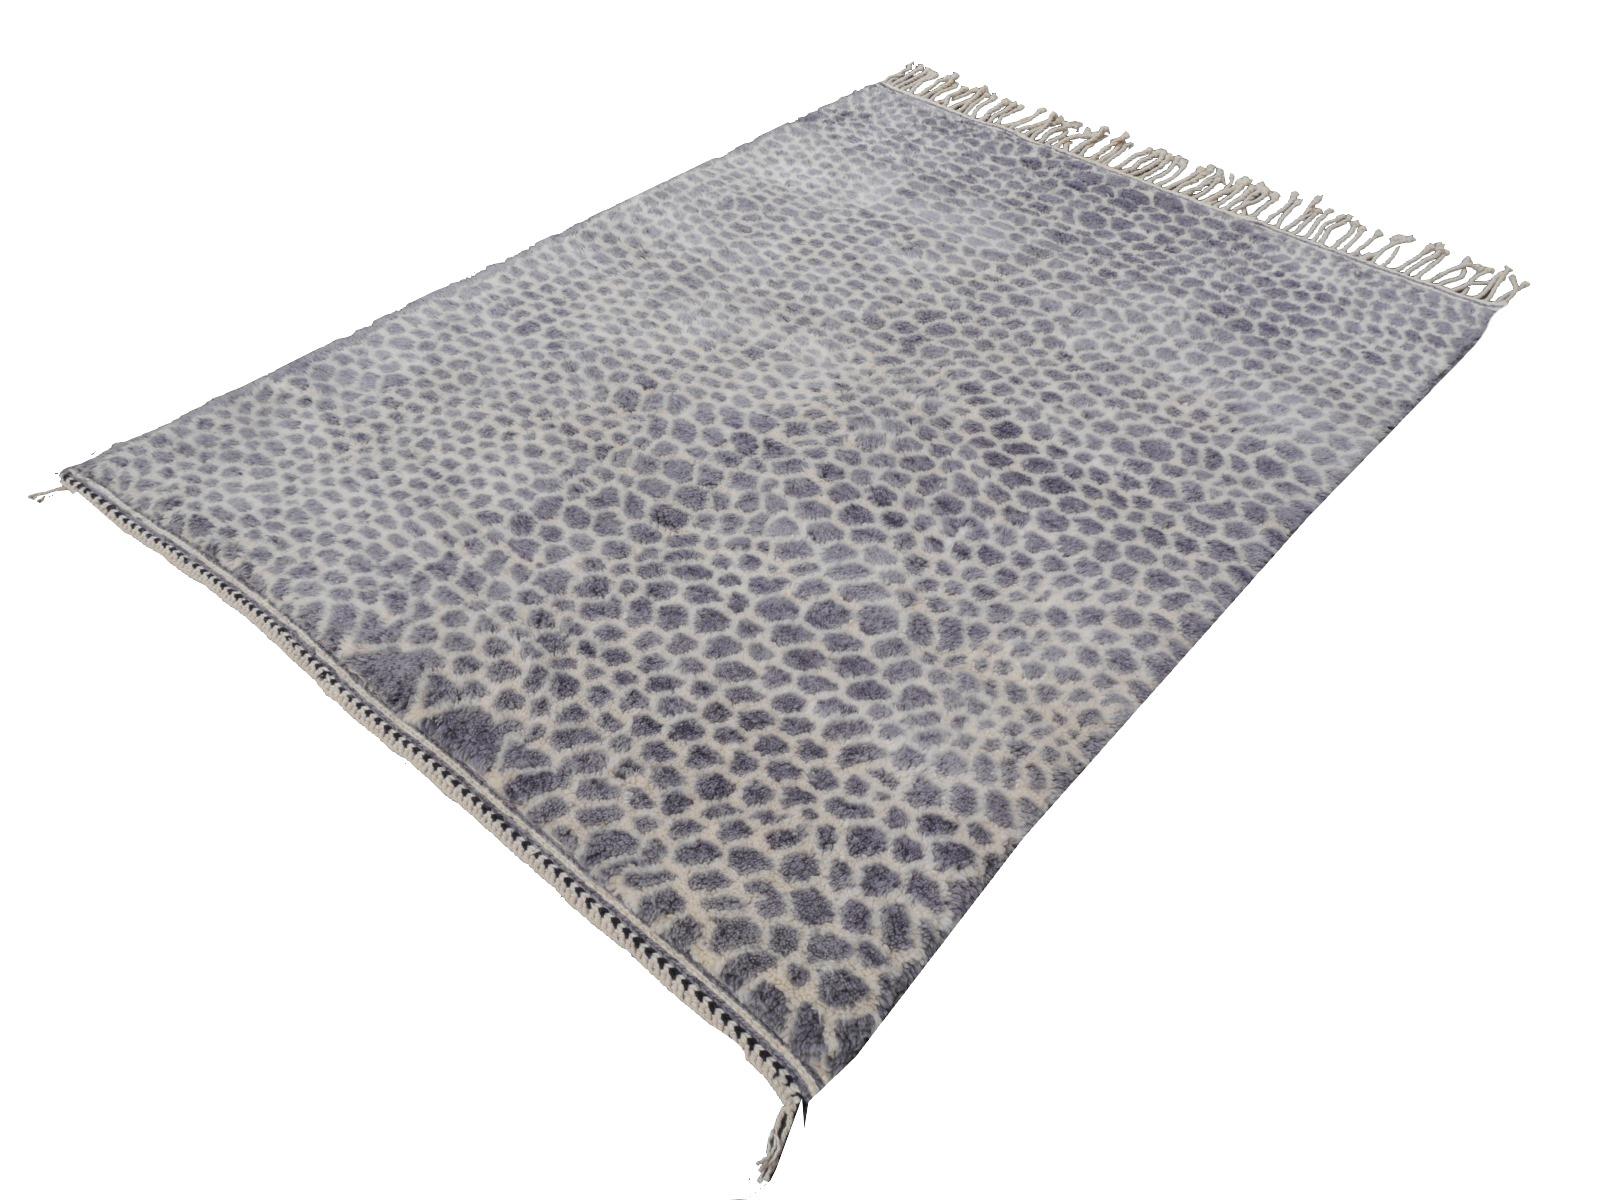 North African Moroccan Berber Rug Leopard Cheetah Design Soft Quality Gray Beige In New Condition For Sale In Lohr, Bavaria, DE